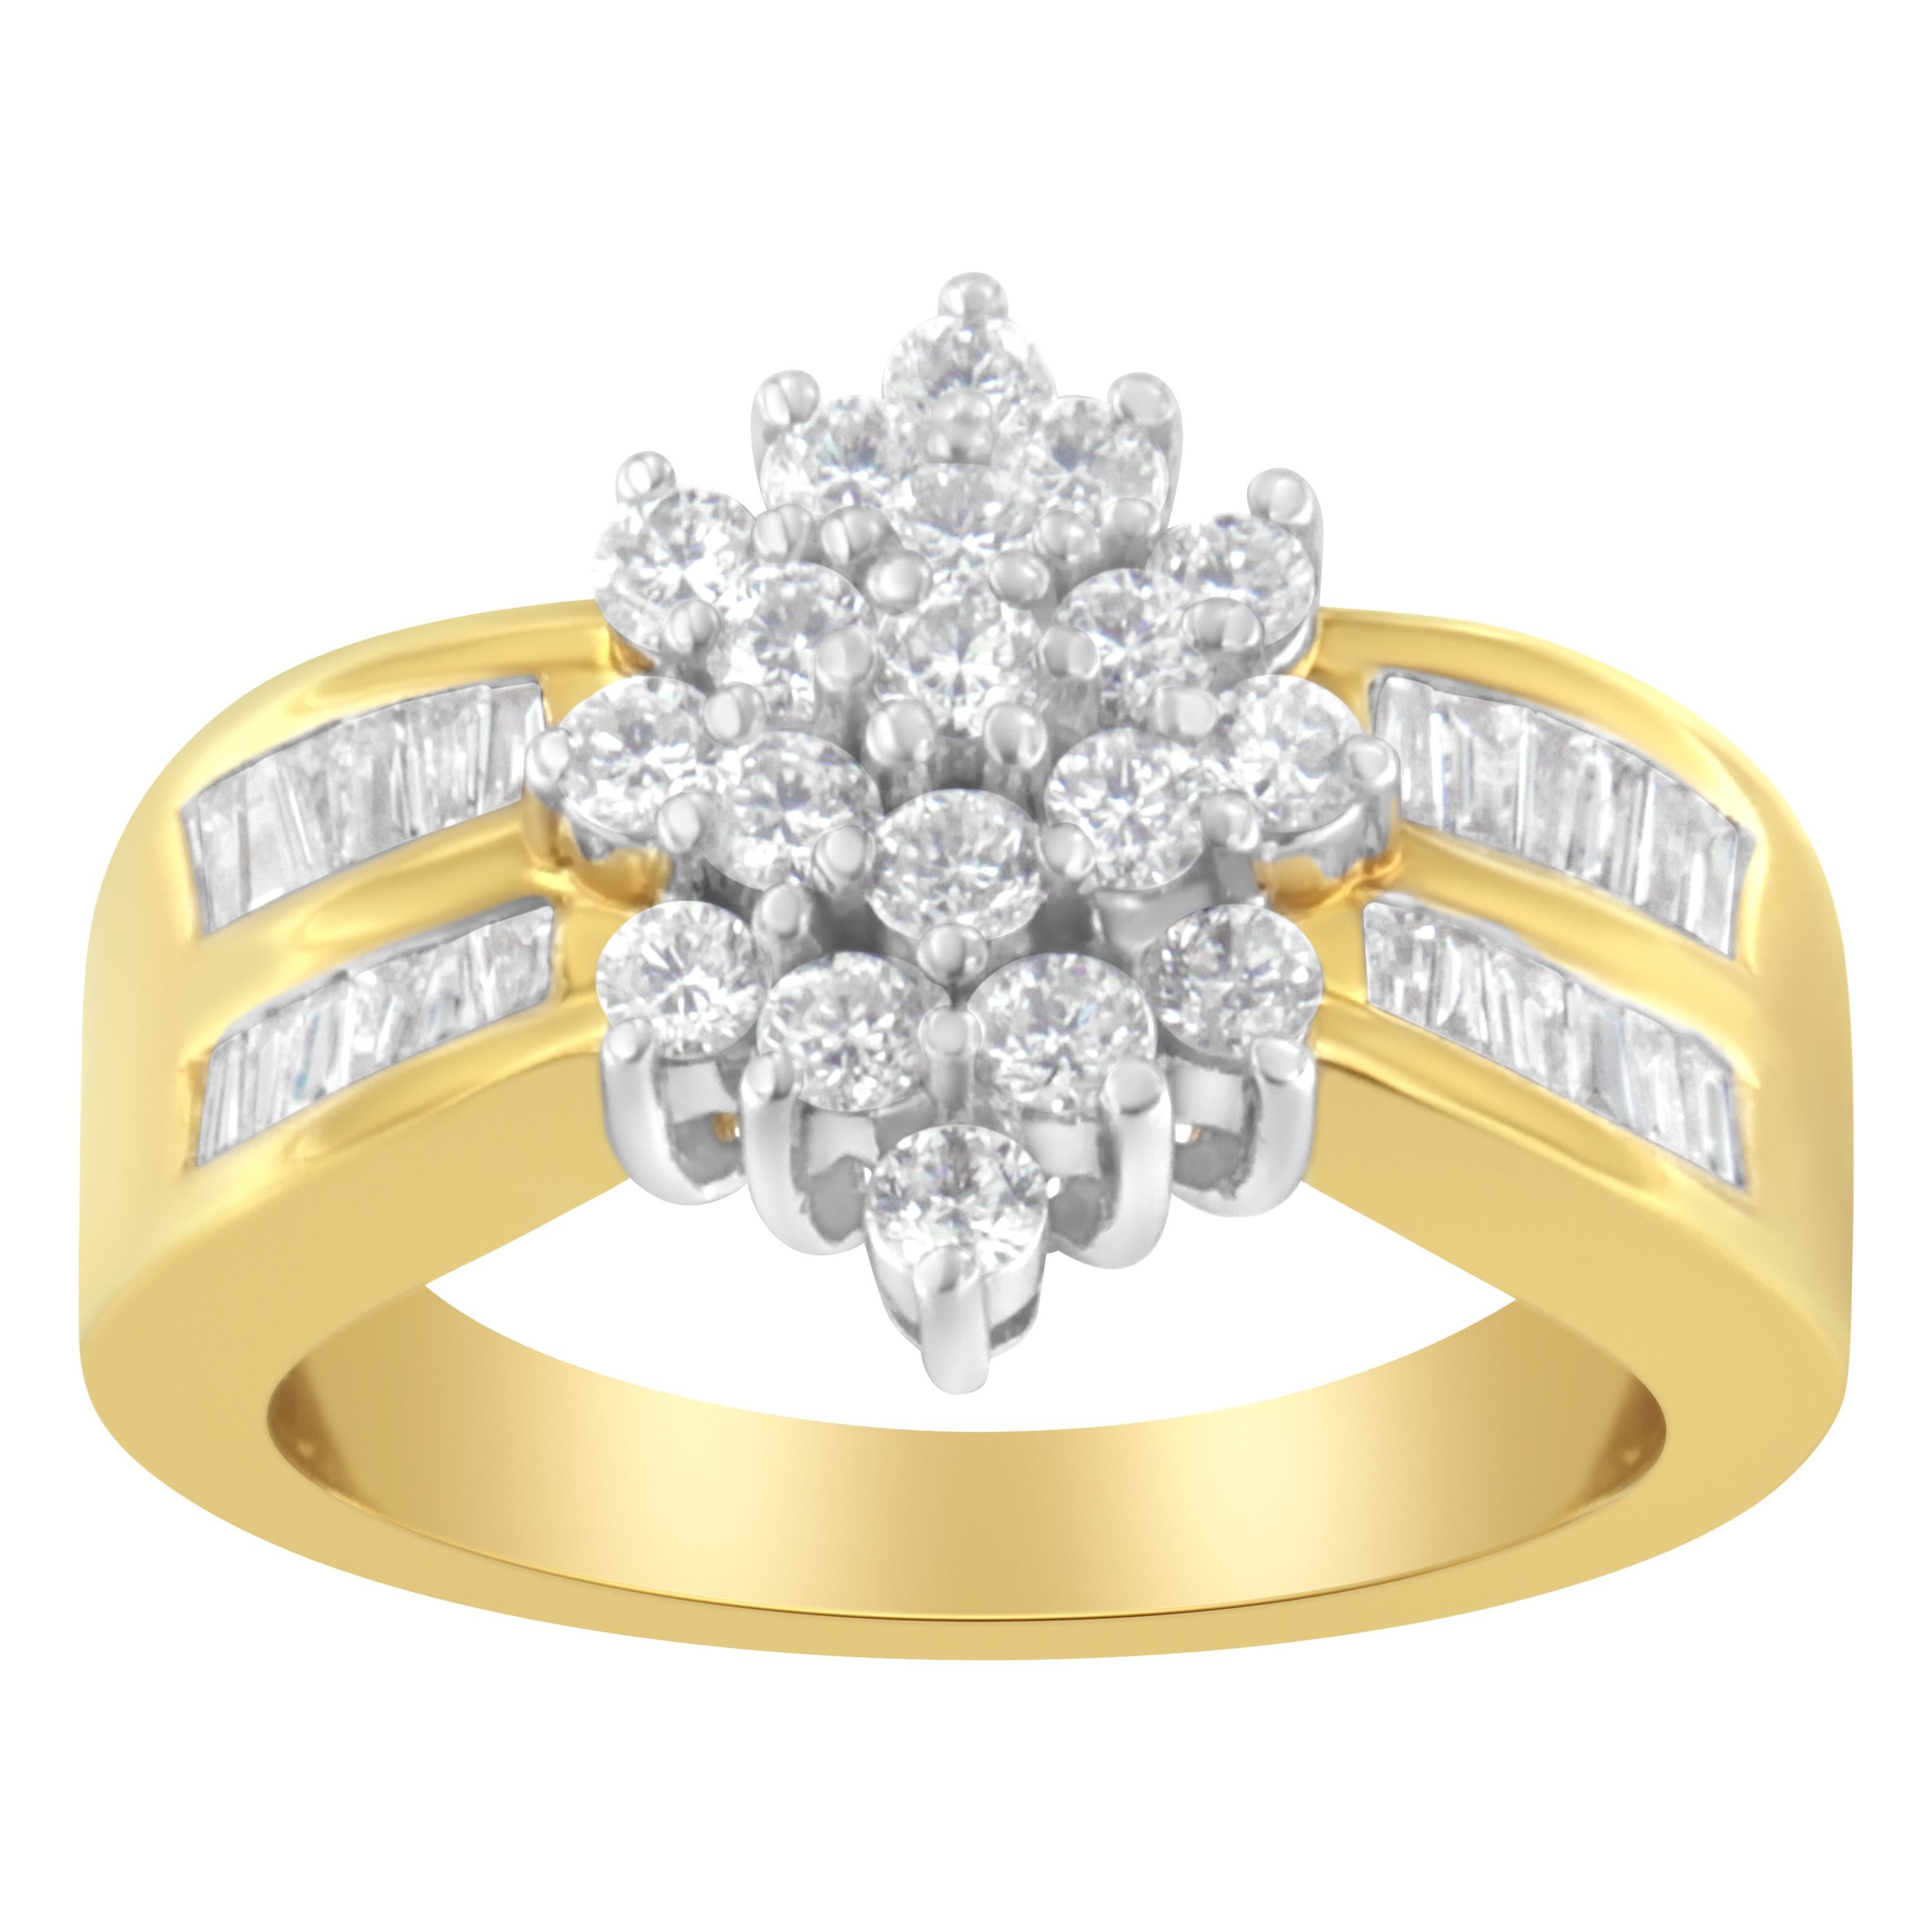 Elegant and timeless, this gorgeous 14K yellow gold diamond cocktail ring features a 1.0-carat total weight of diamonds with a whopping 39 individual stones. The fashion ring features a raised, multi-tier starburst-shaped cluster made up of round